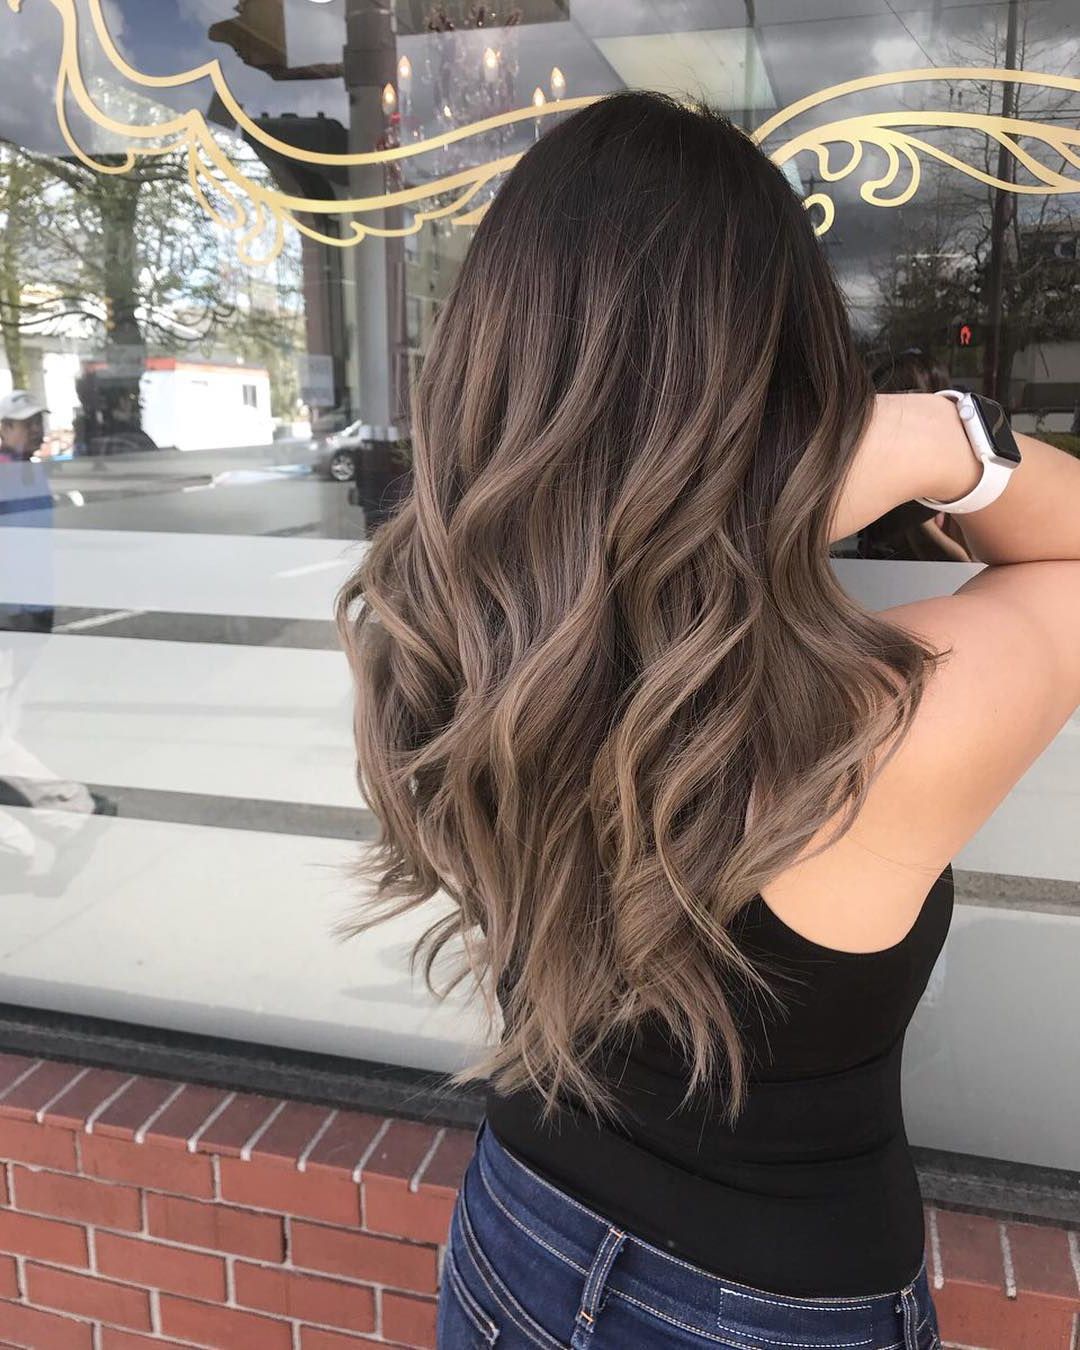 5 Coolest Hair Color Trends In 2018 | Worldhairtrends Within Short Hairstyles With Delicious Brown Coloring (View 1 of 20)